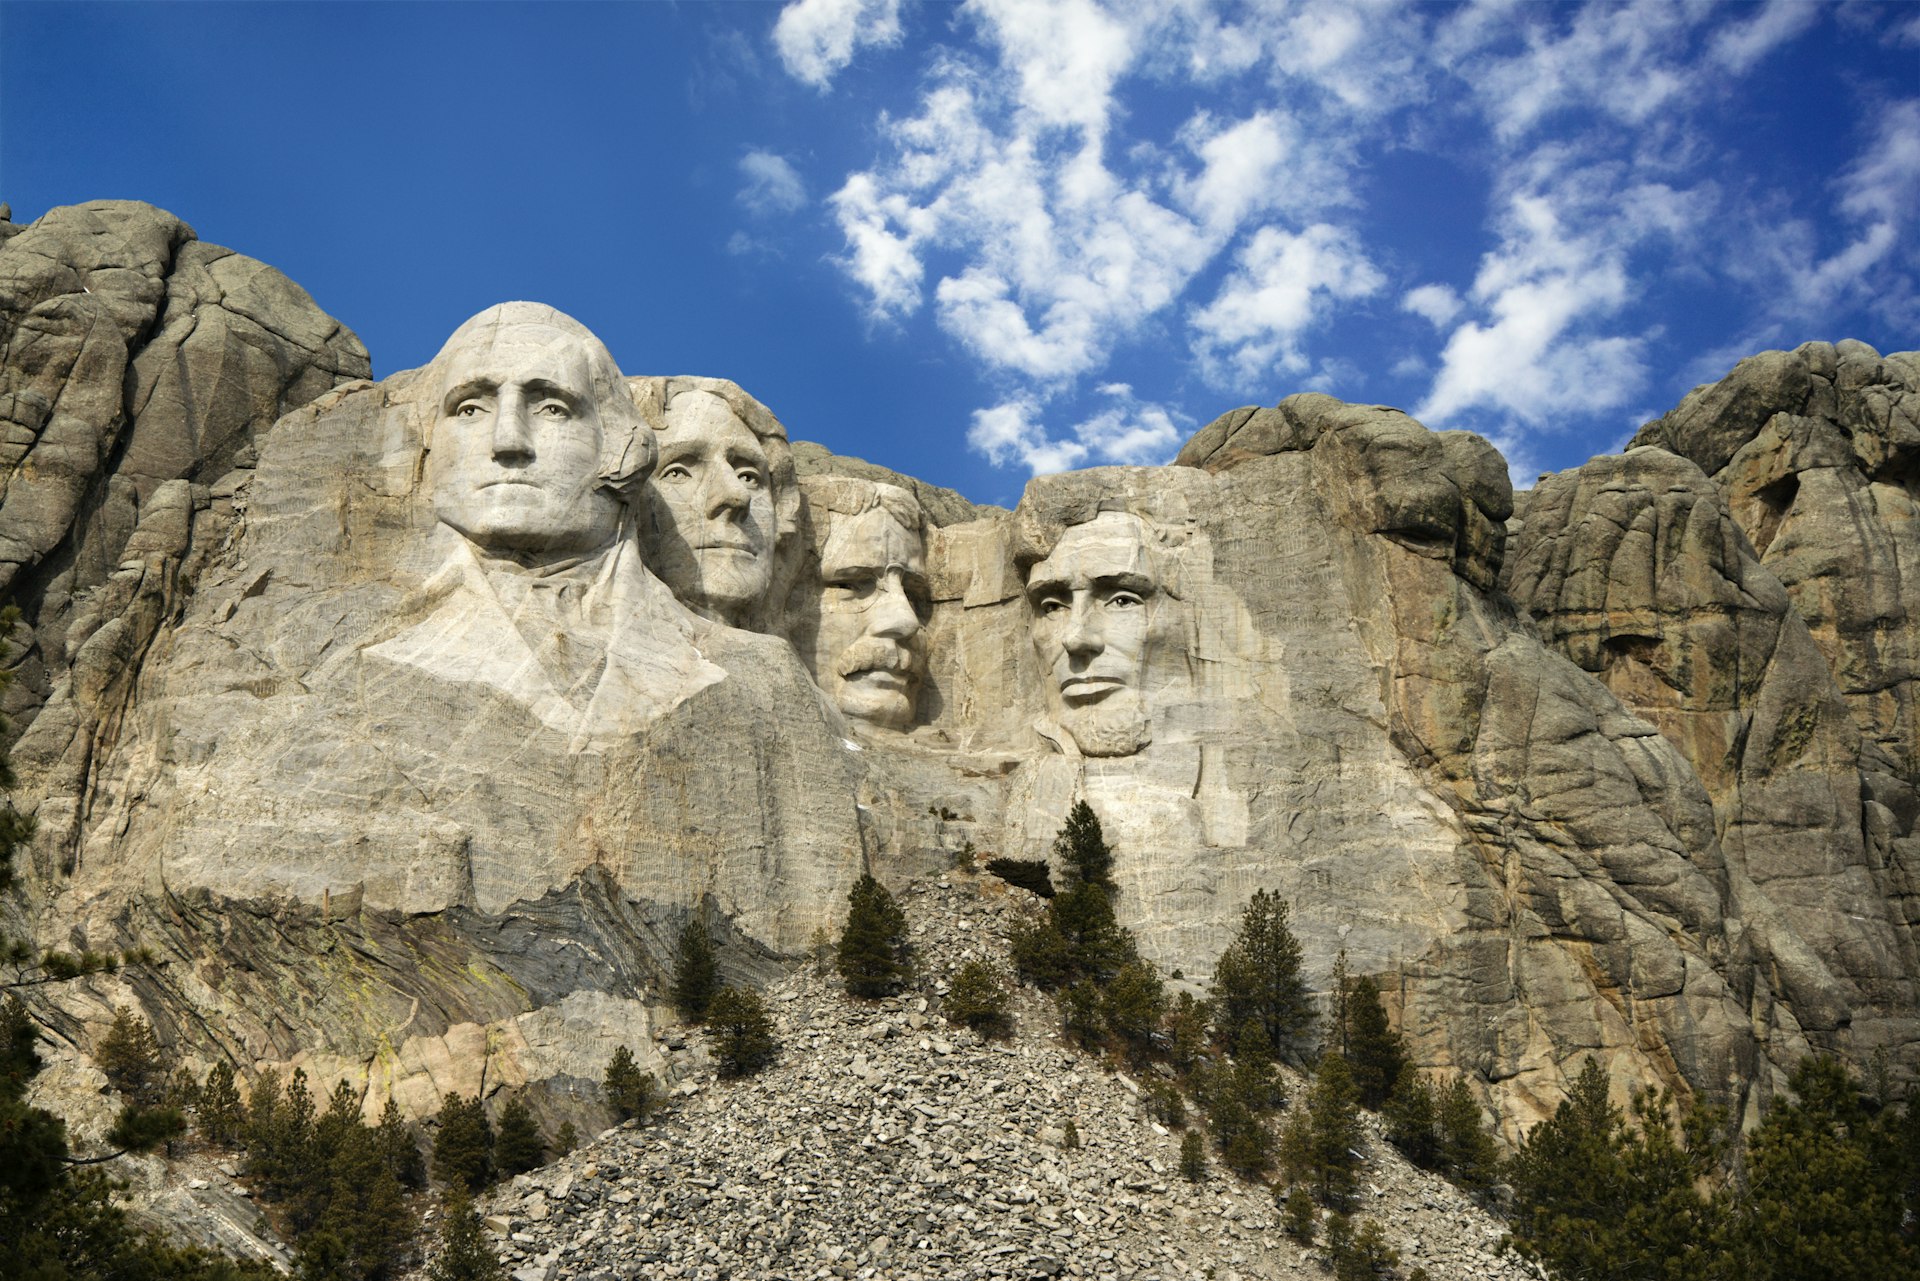 500px Photo ID: 78397005 - Presidential sculpture at Mount Rushmore National Monument, South Dakota.